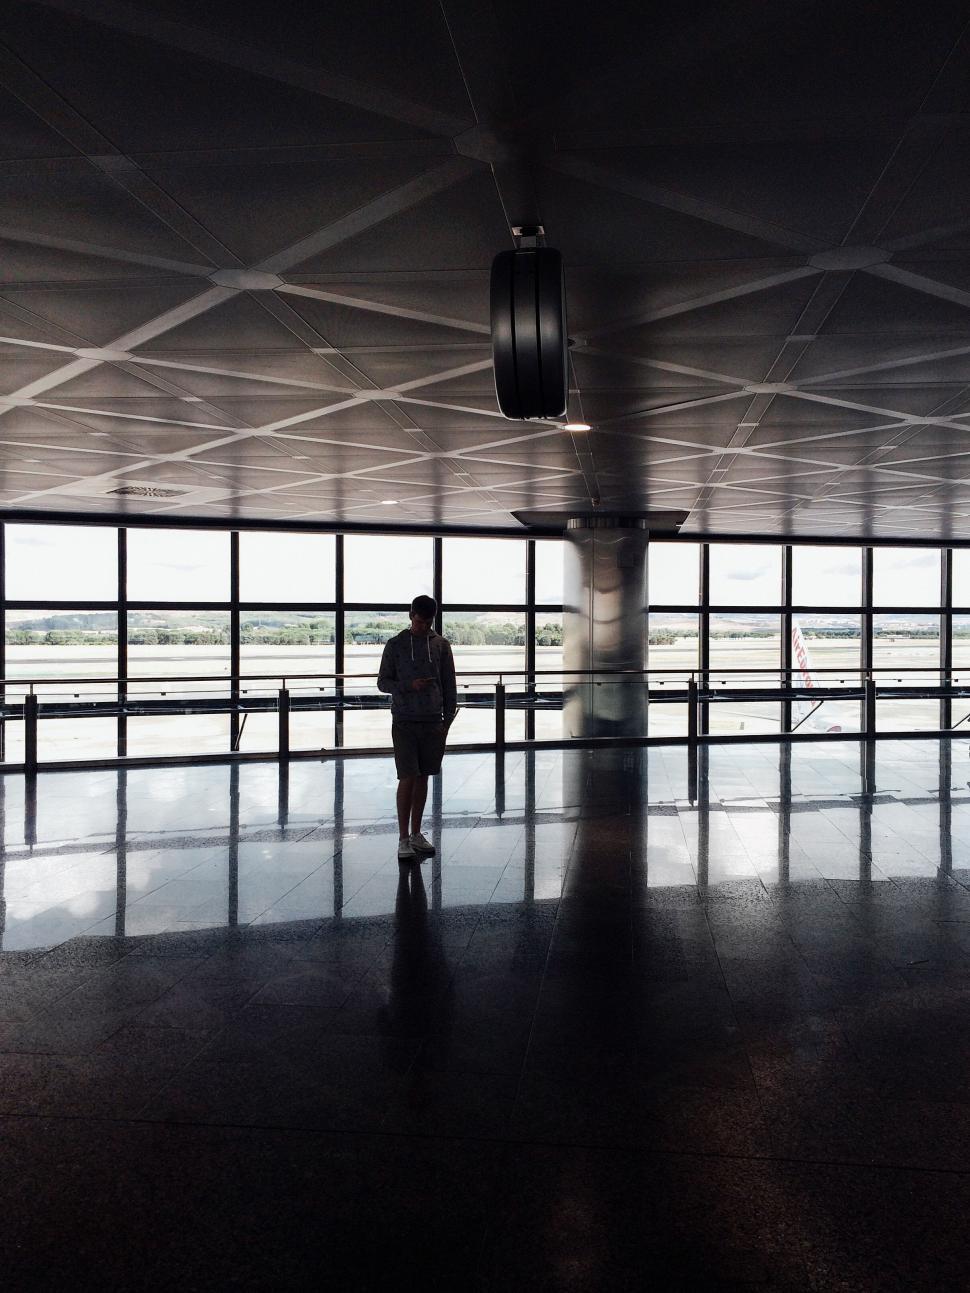 Free Image of Person Walking Through Airport 